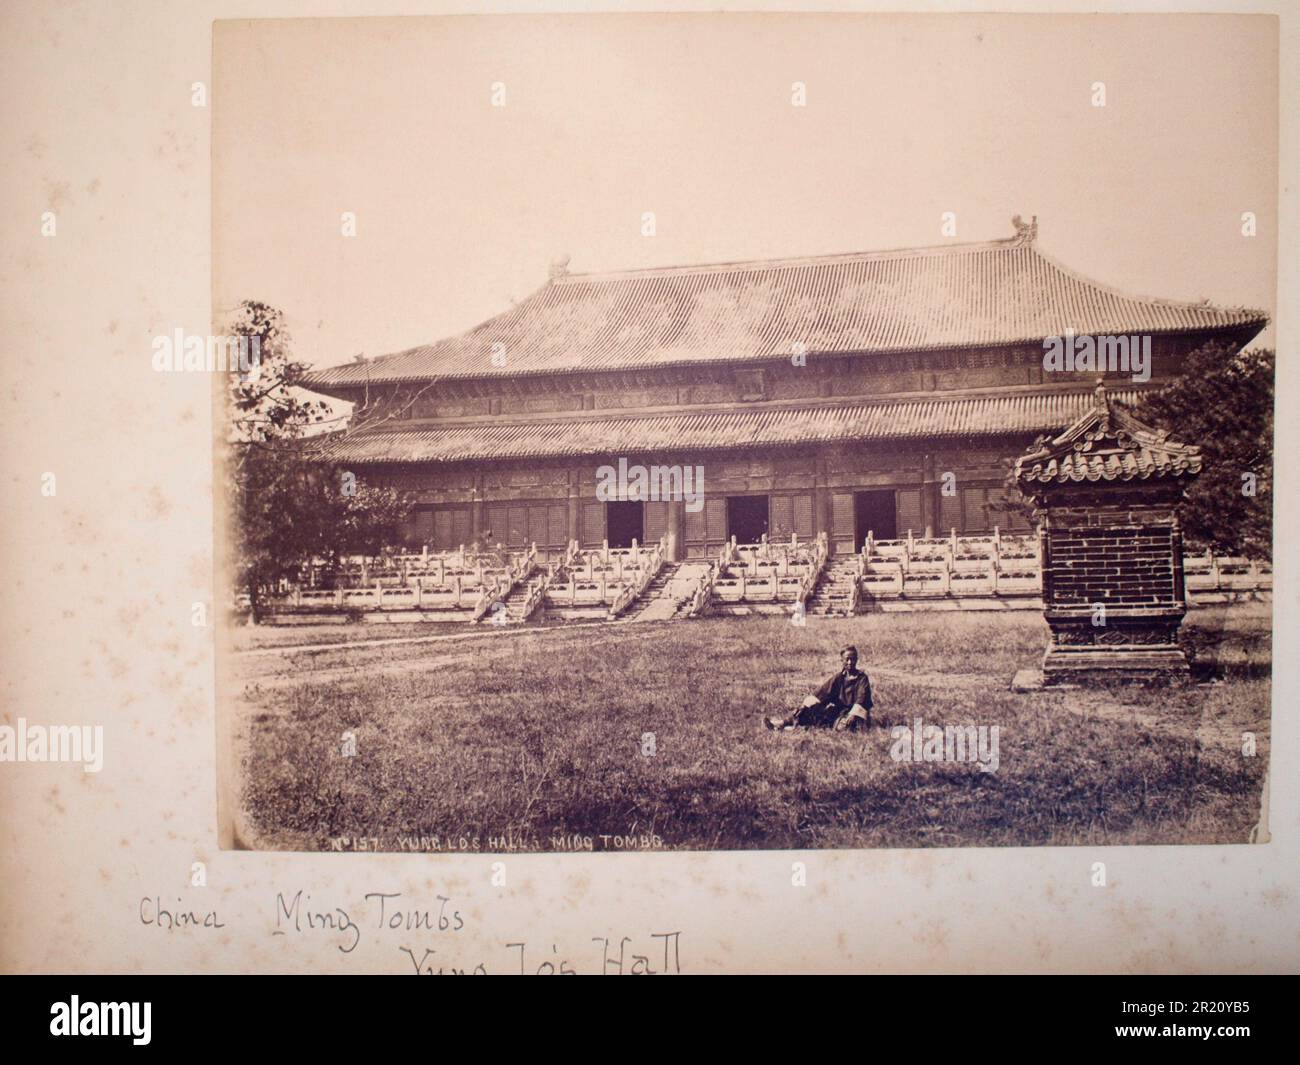 Thomas Childs Photographs of China. Childs was a photographer and engineer from England. His images are from the 1870s and 1880s, some of the earliest images from China. Stock Photo